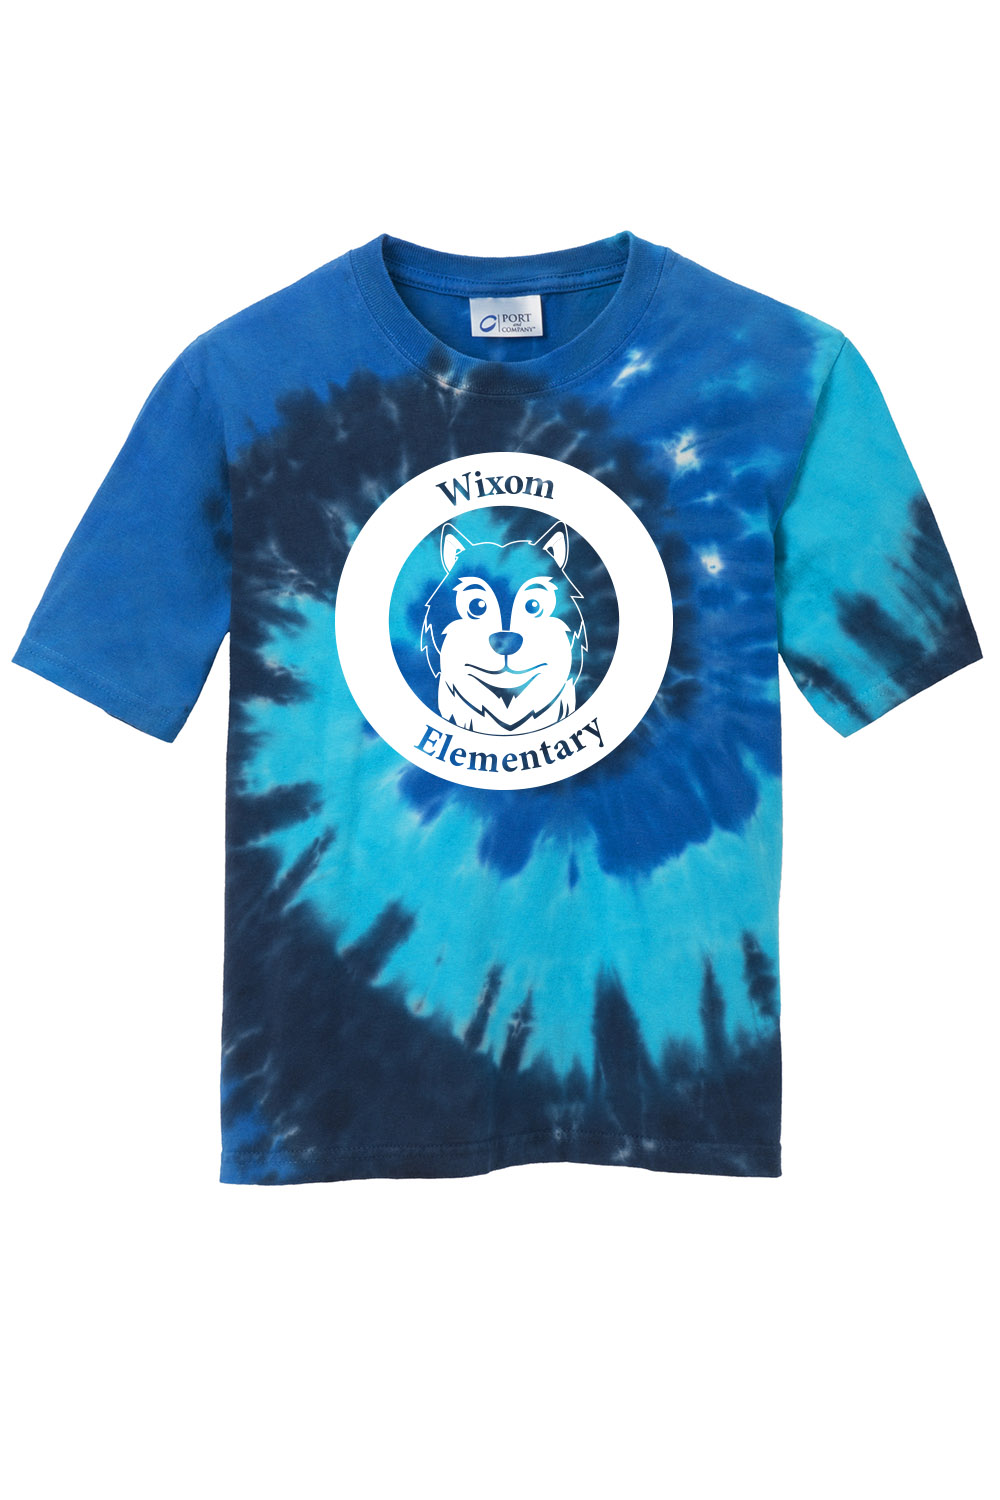 Kids Tie Dye Bleach 95% Polyester Sublimation T-Shirt – LAWSON SUPPLY